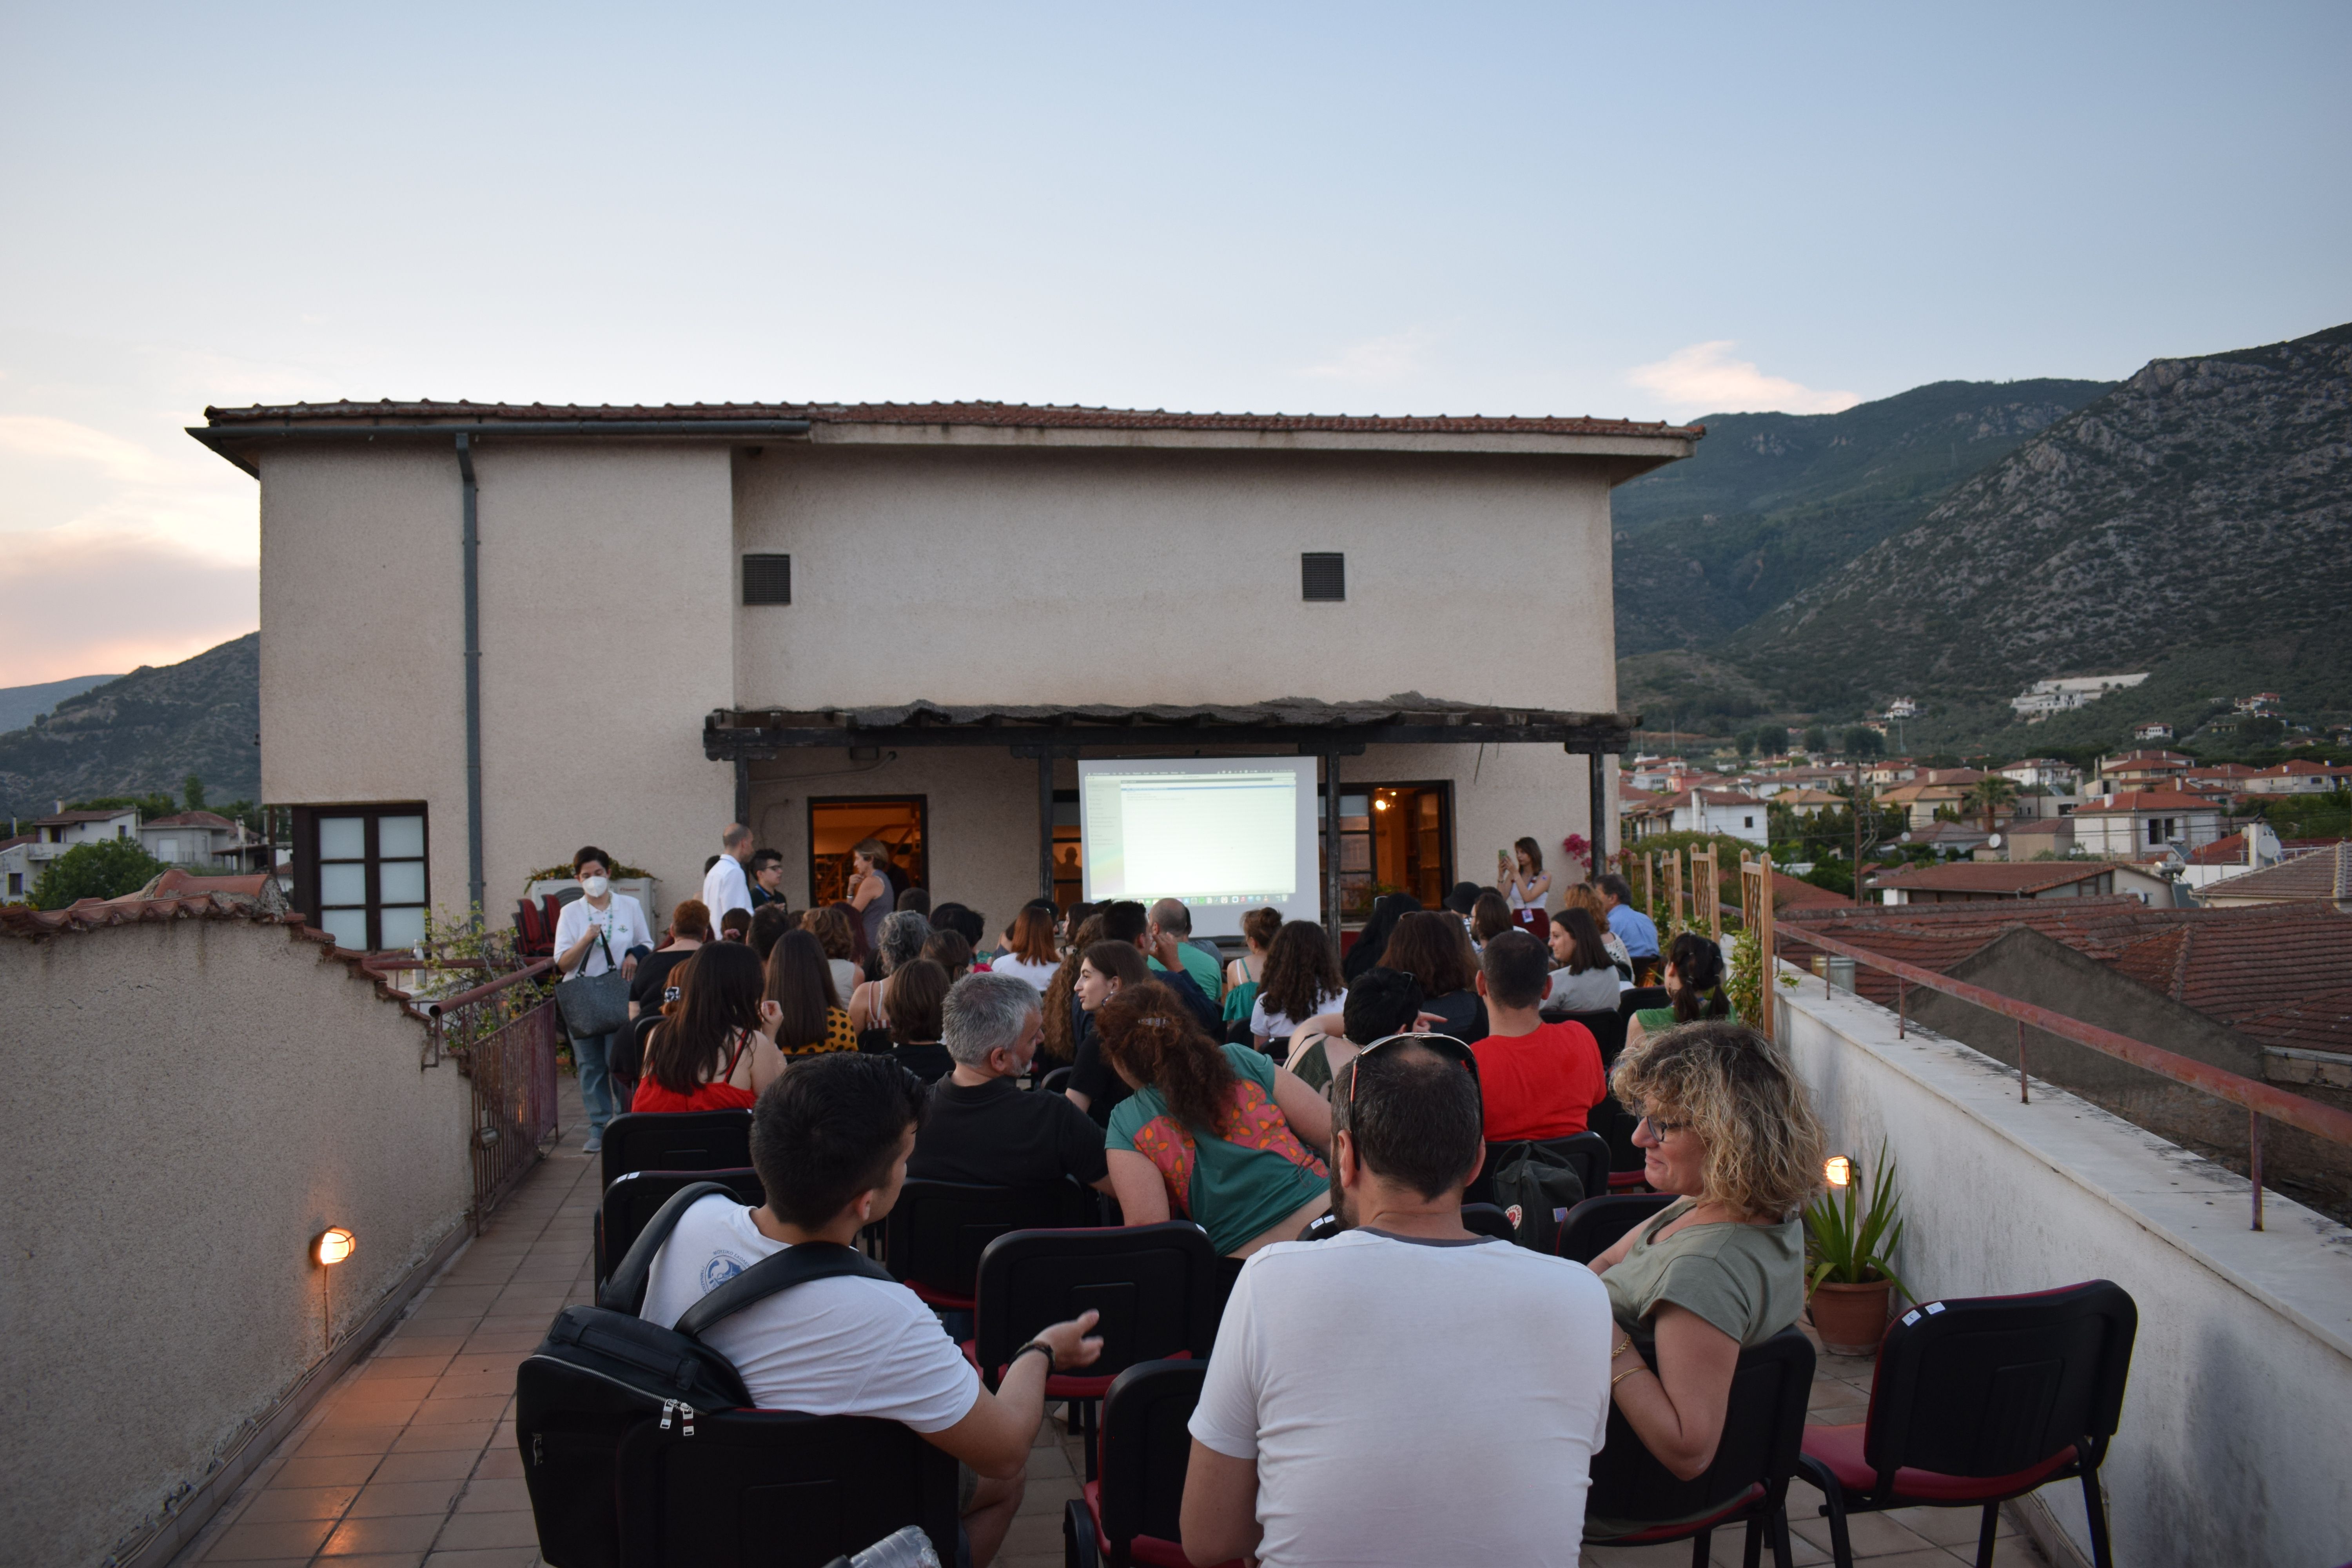 An audience gathered on a roof for an outdoor cinema projection